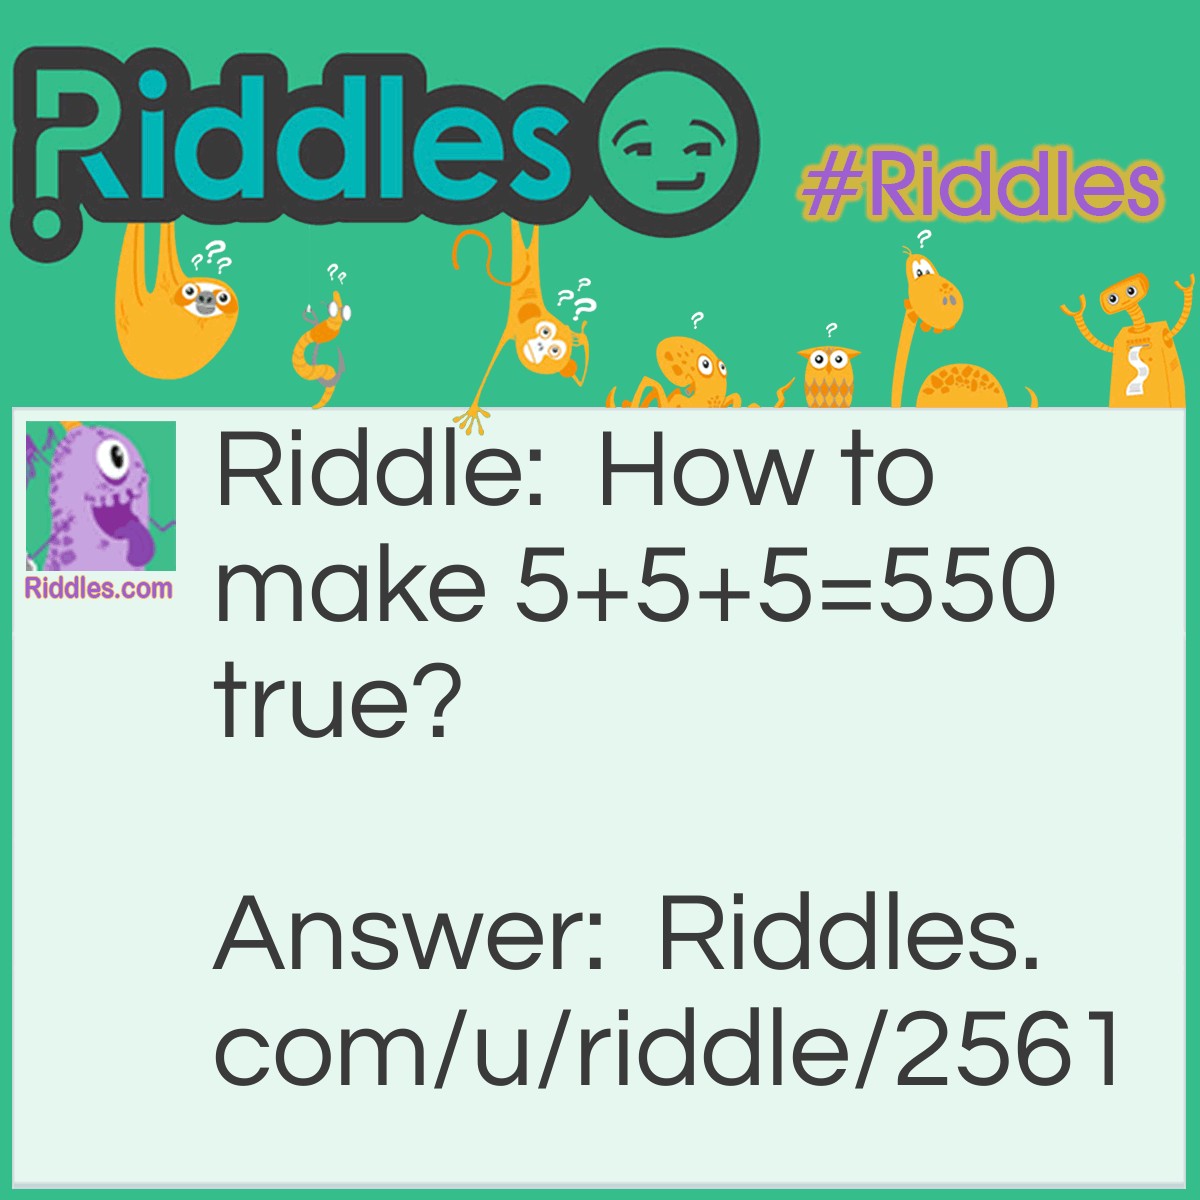 Riddle: How to make 5+5+5=550 true? Answer: Draw a line on the first addition sign to make + into 4.